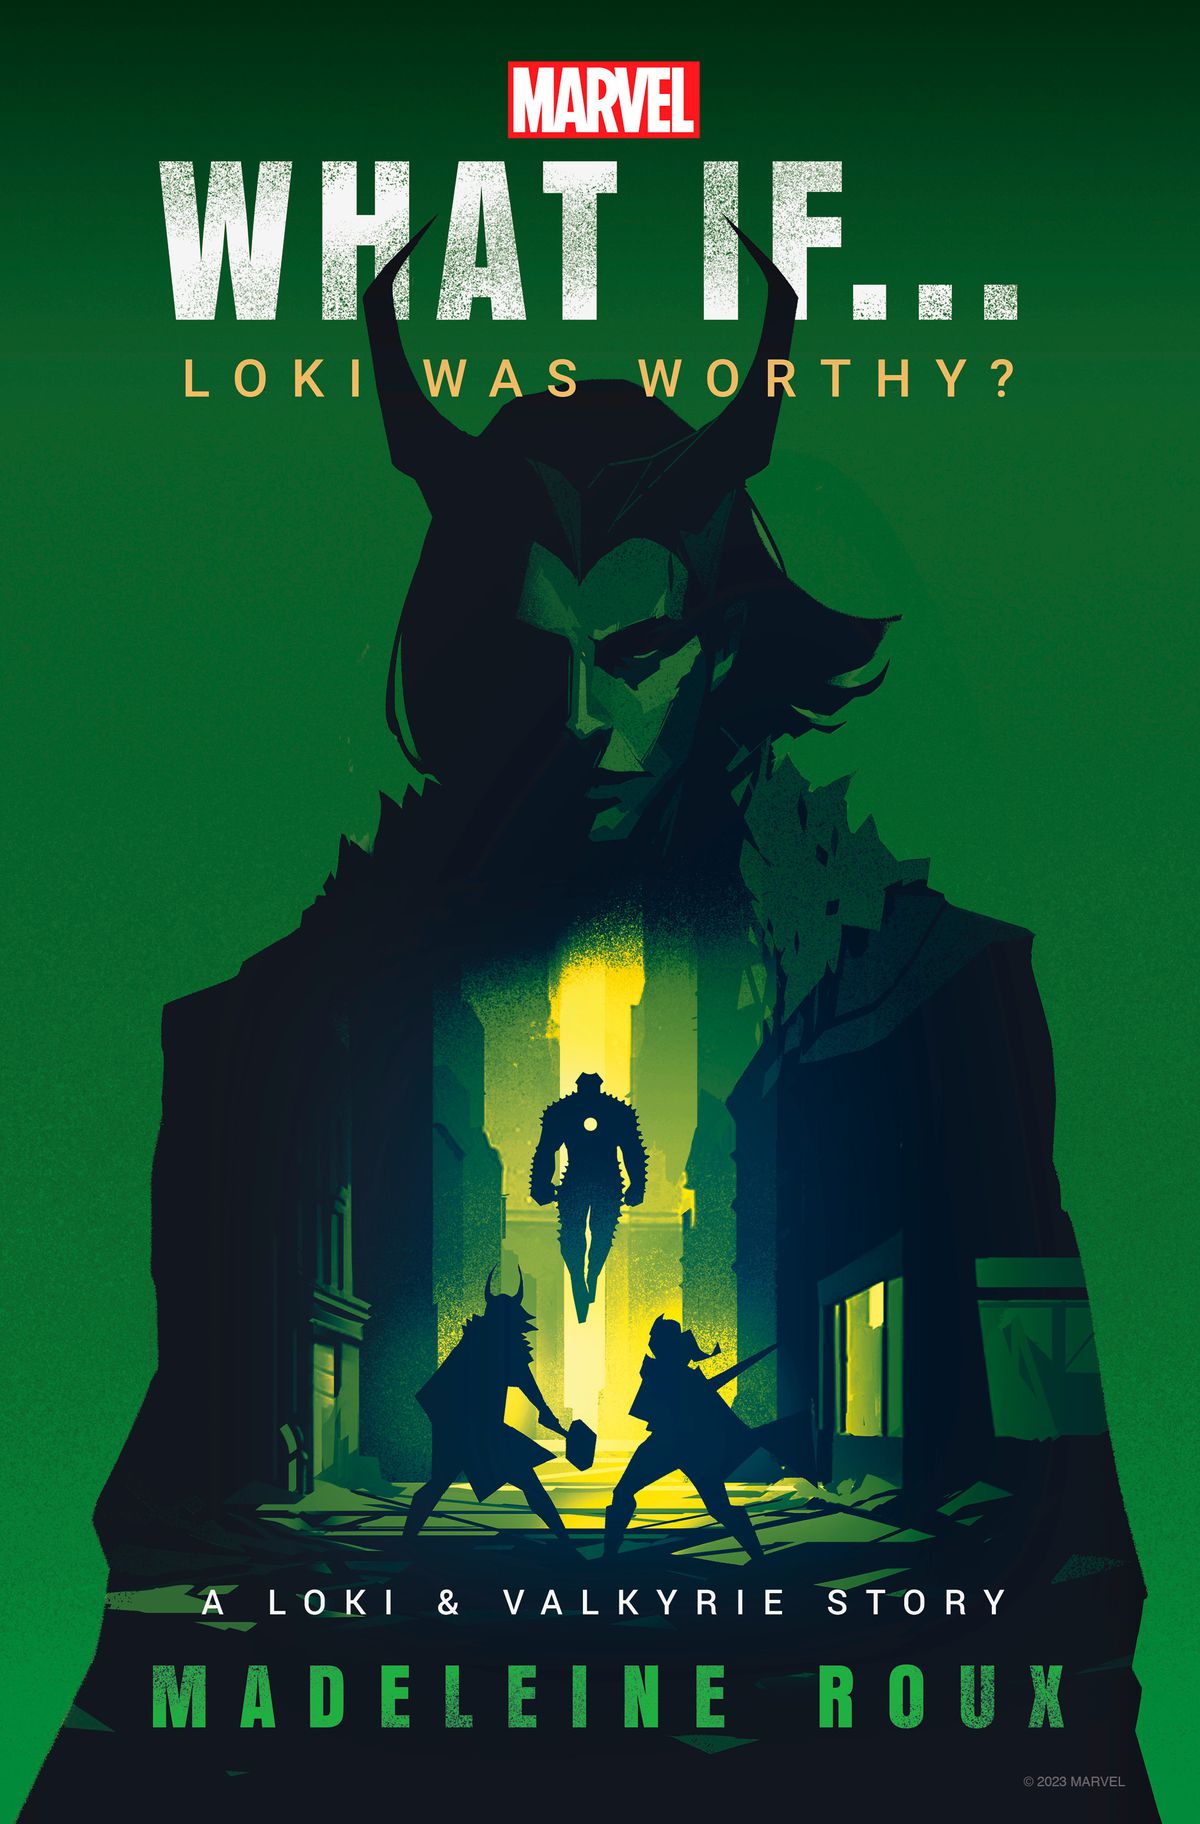 The Watcher has a terrible morning in Marvel’s new What If… Loki Was Worthy